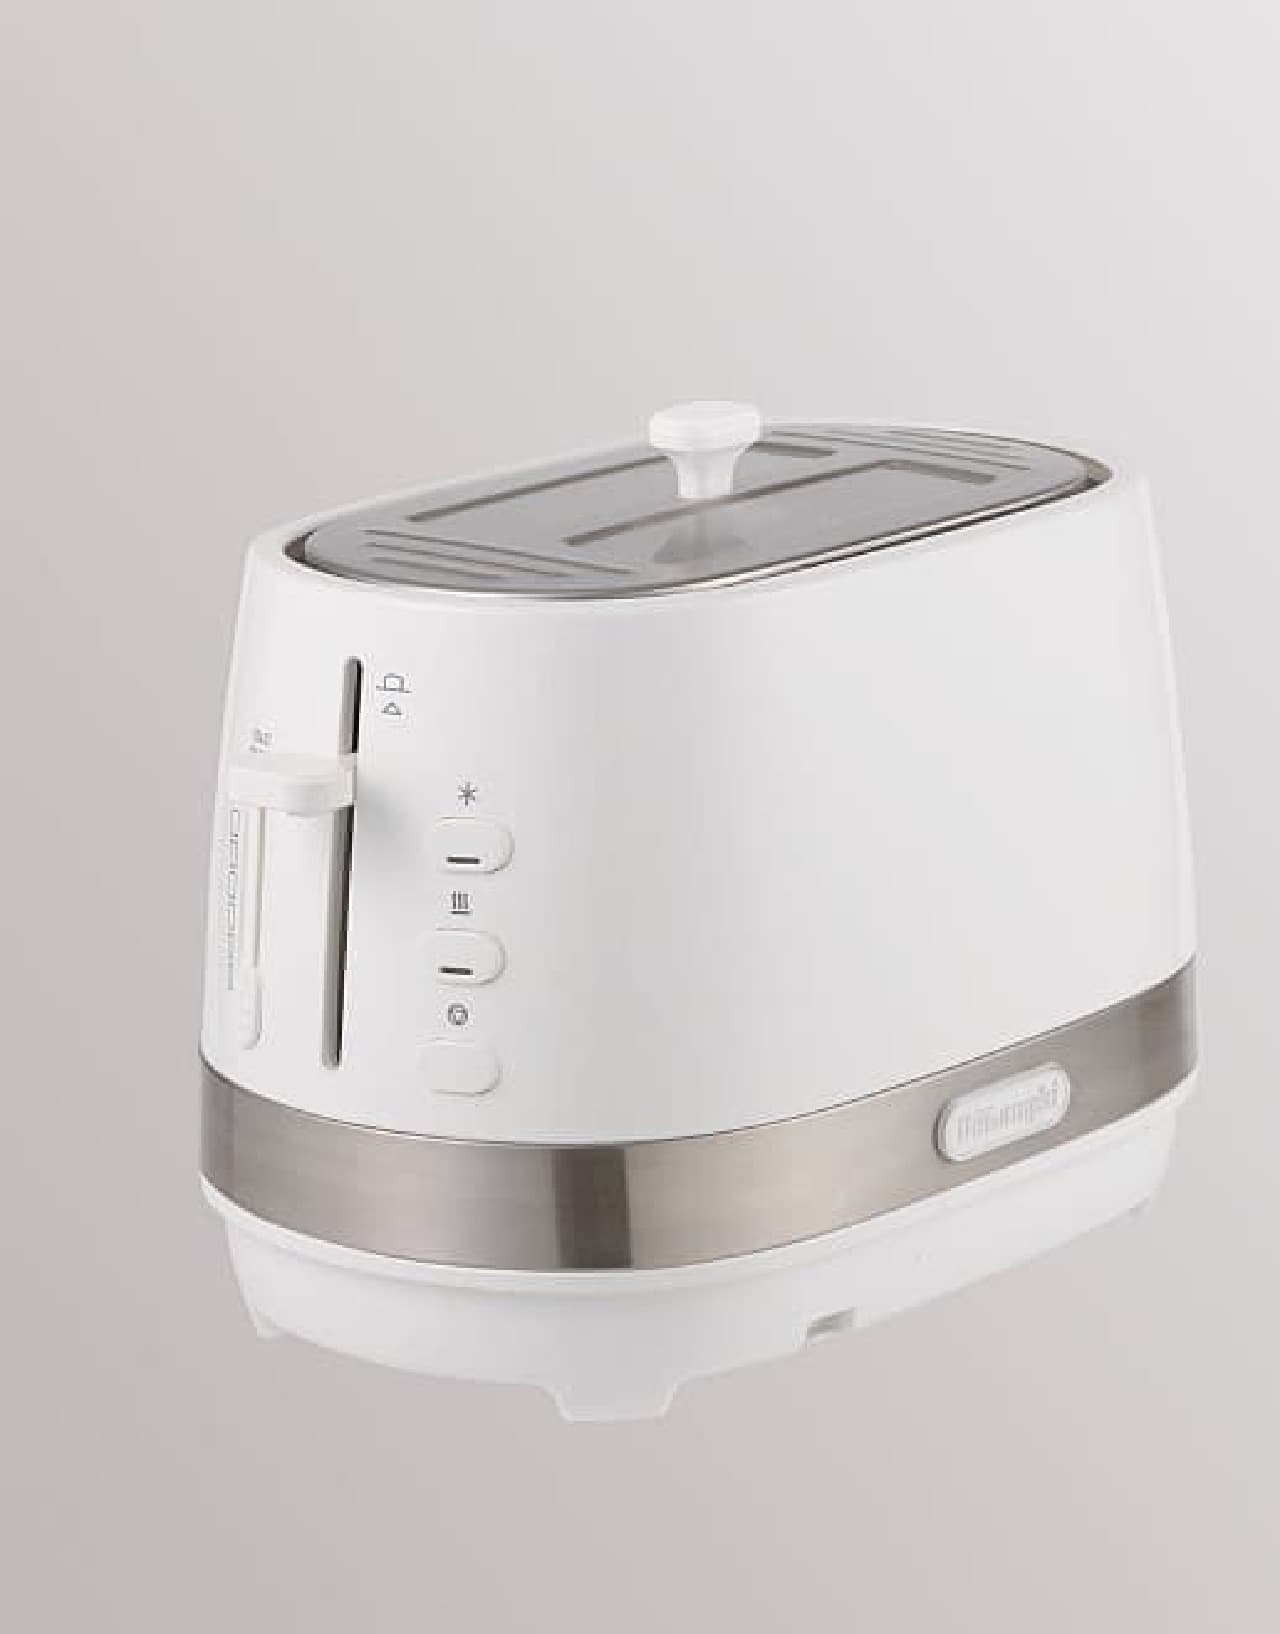 Delonghi "Active Series" pop-up toaster